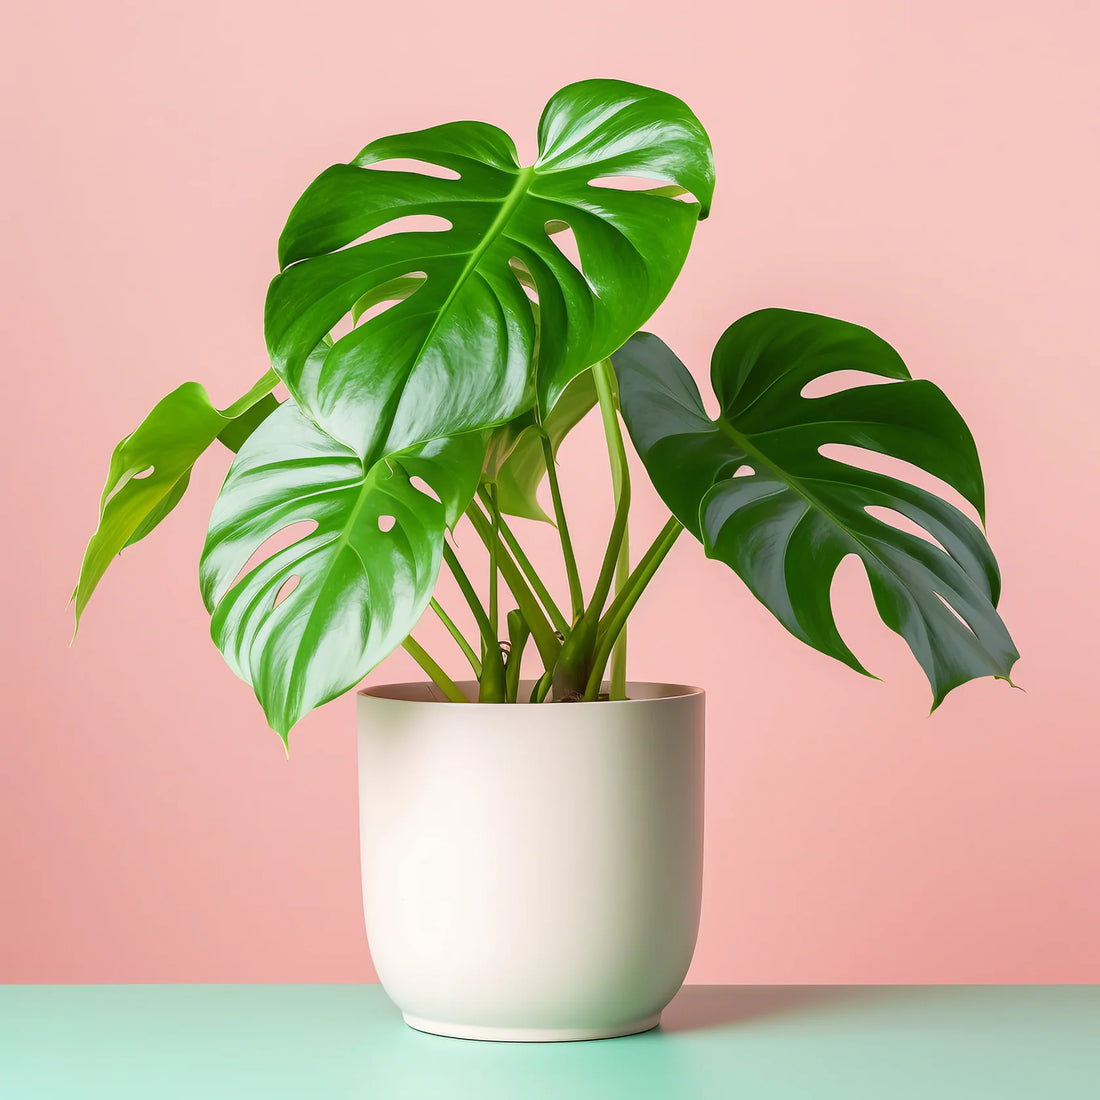 How to Care for a Monstera Plant, aka the Swiss Cheese Plant